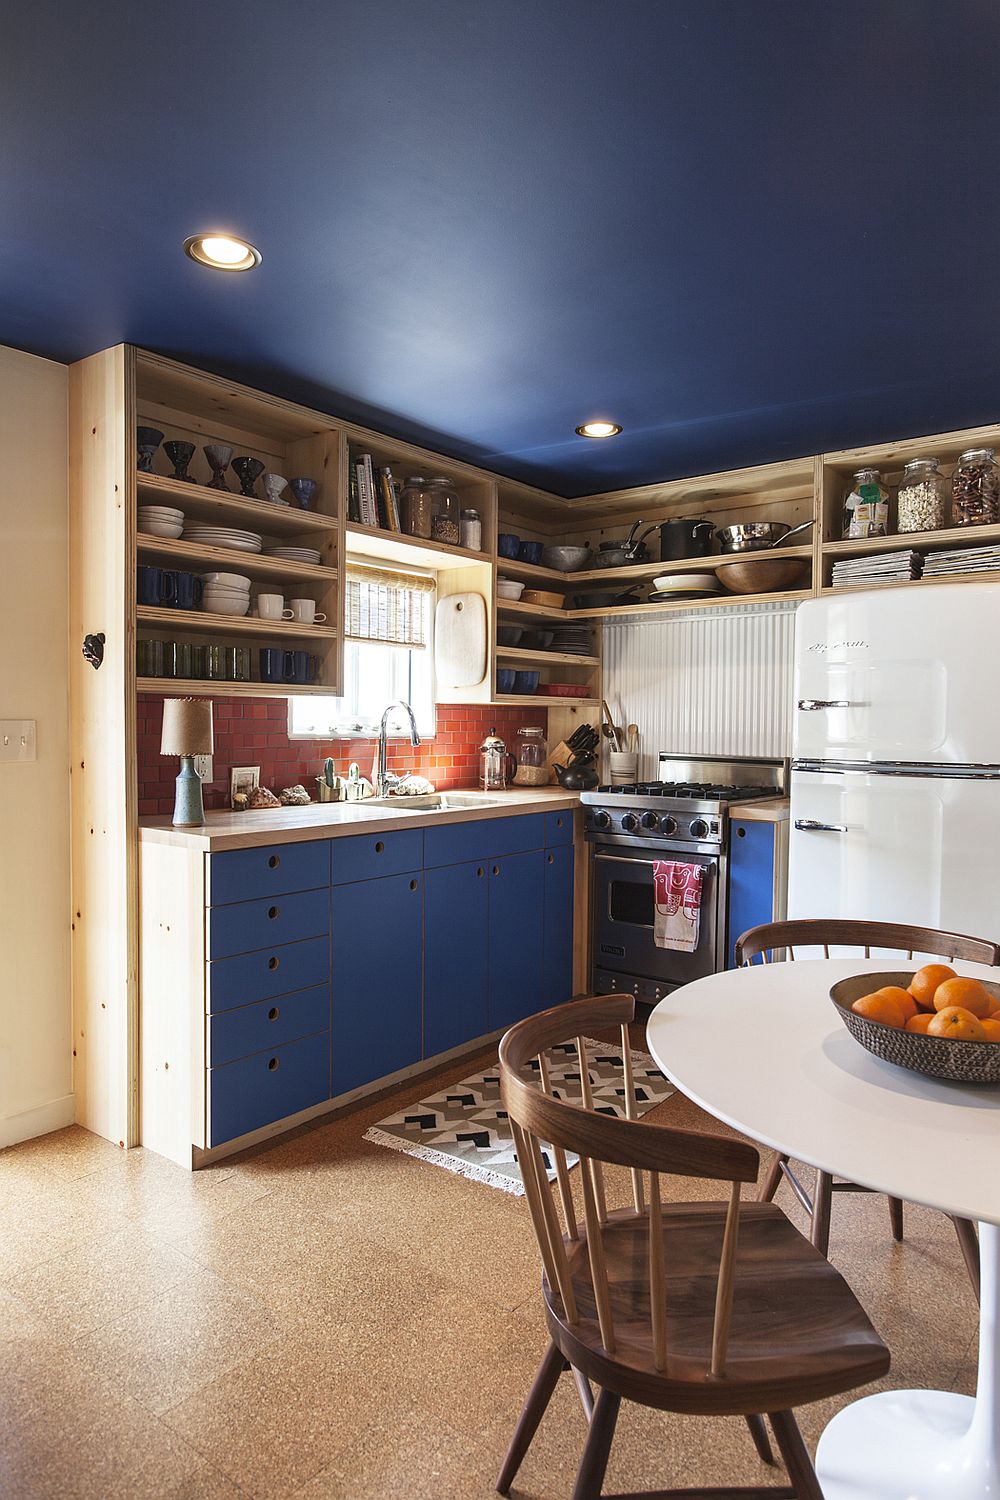 Blue-cabinets-in-the-kitchen-add-to-the-colorful-appeal-of-the-trailer-home-with-a-striking-blue-ceiling-30221